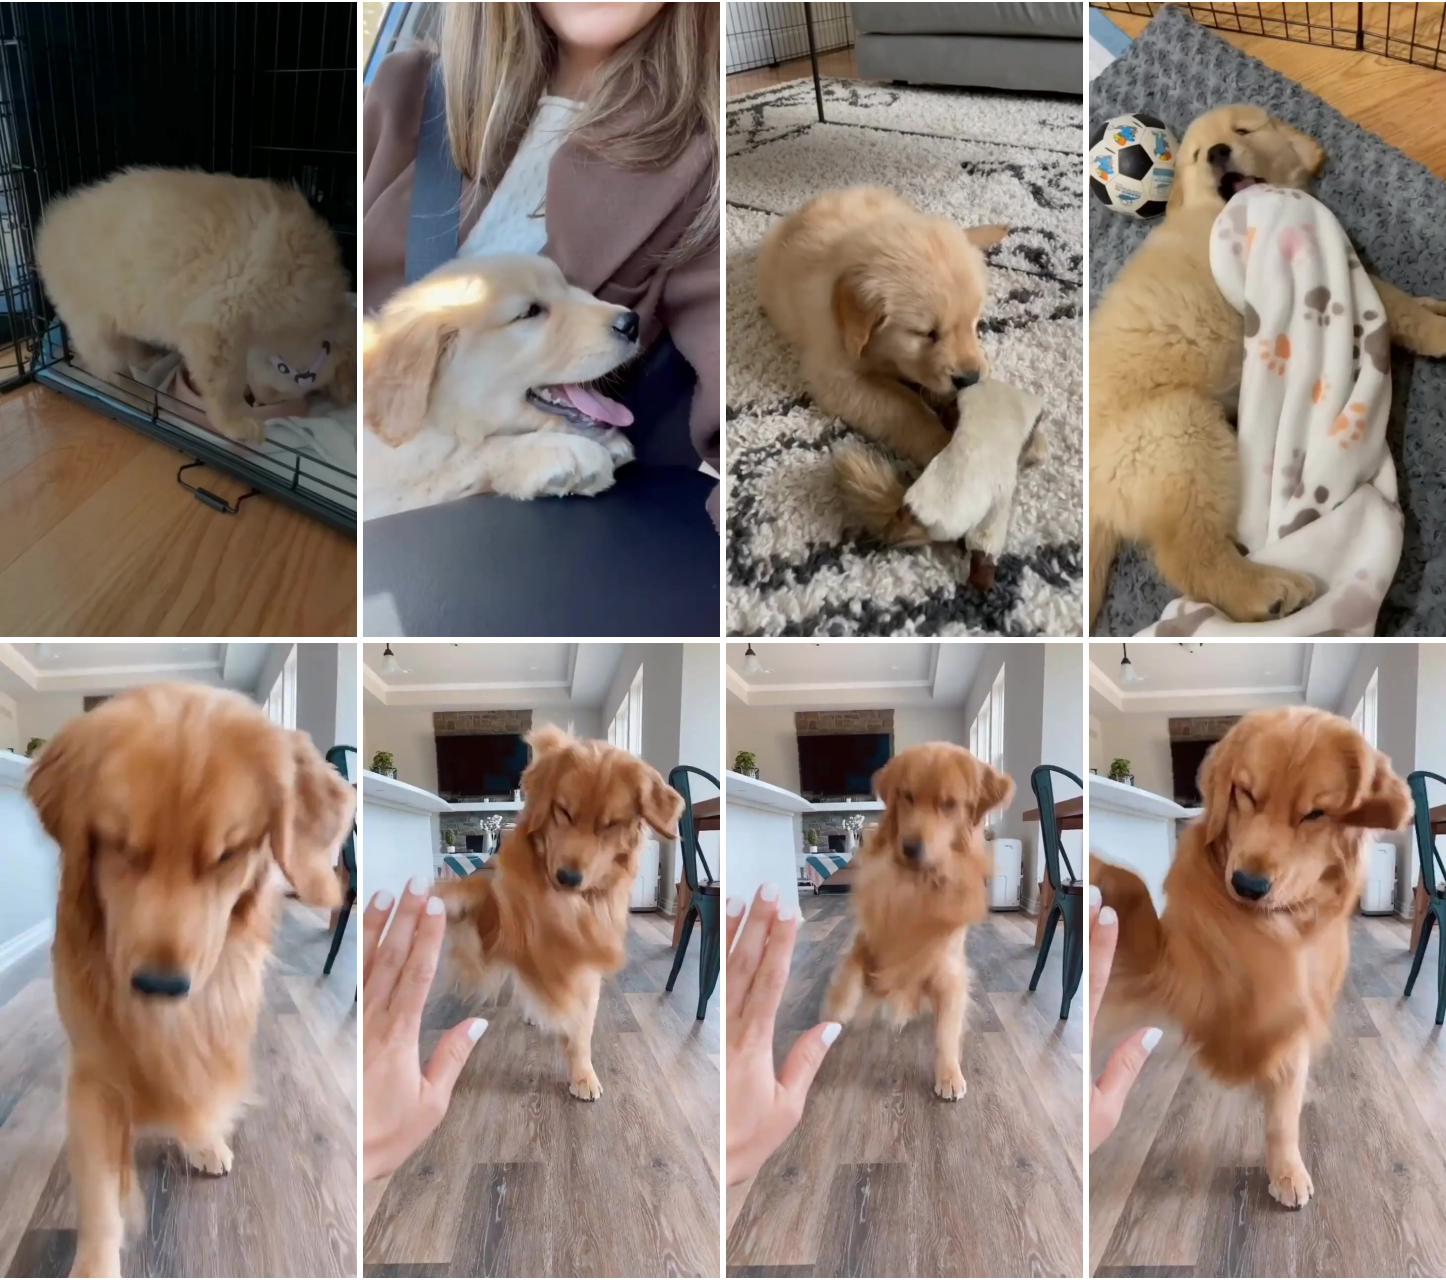 Life with golden retriever puppy be like; come those 5 #loveanimals #dogs